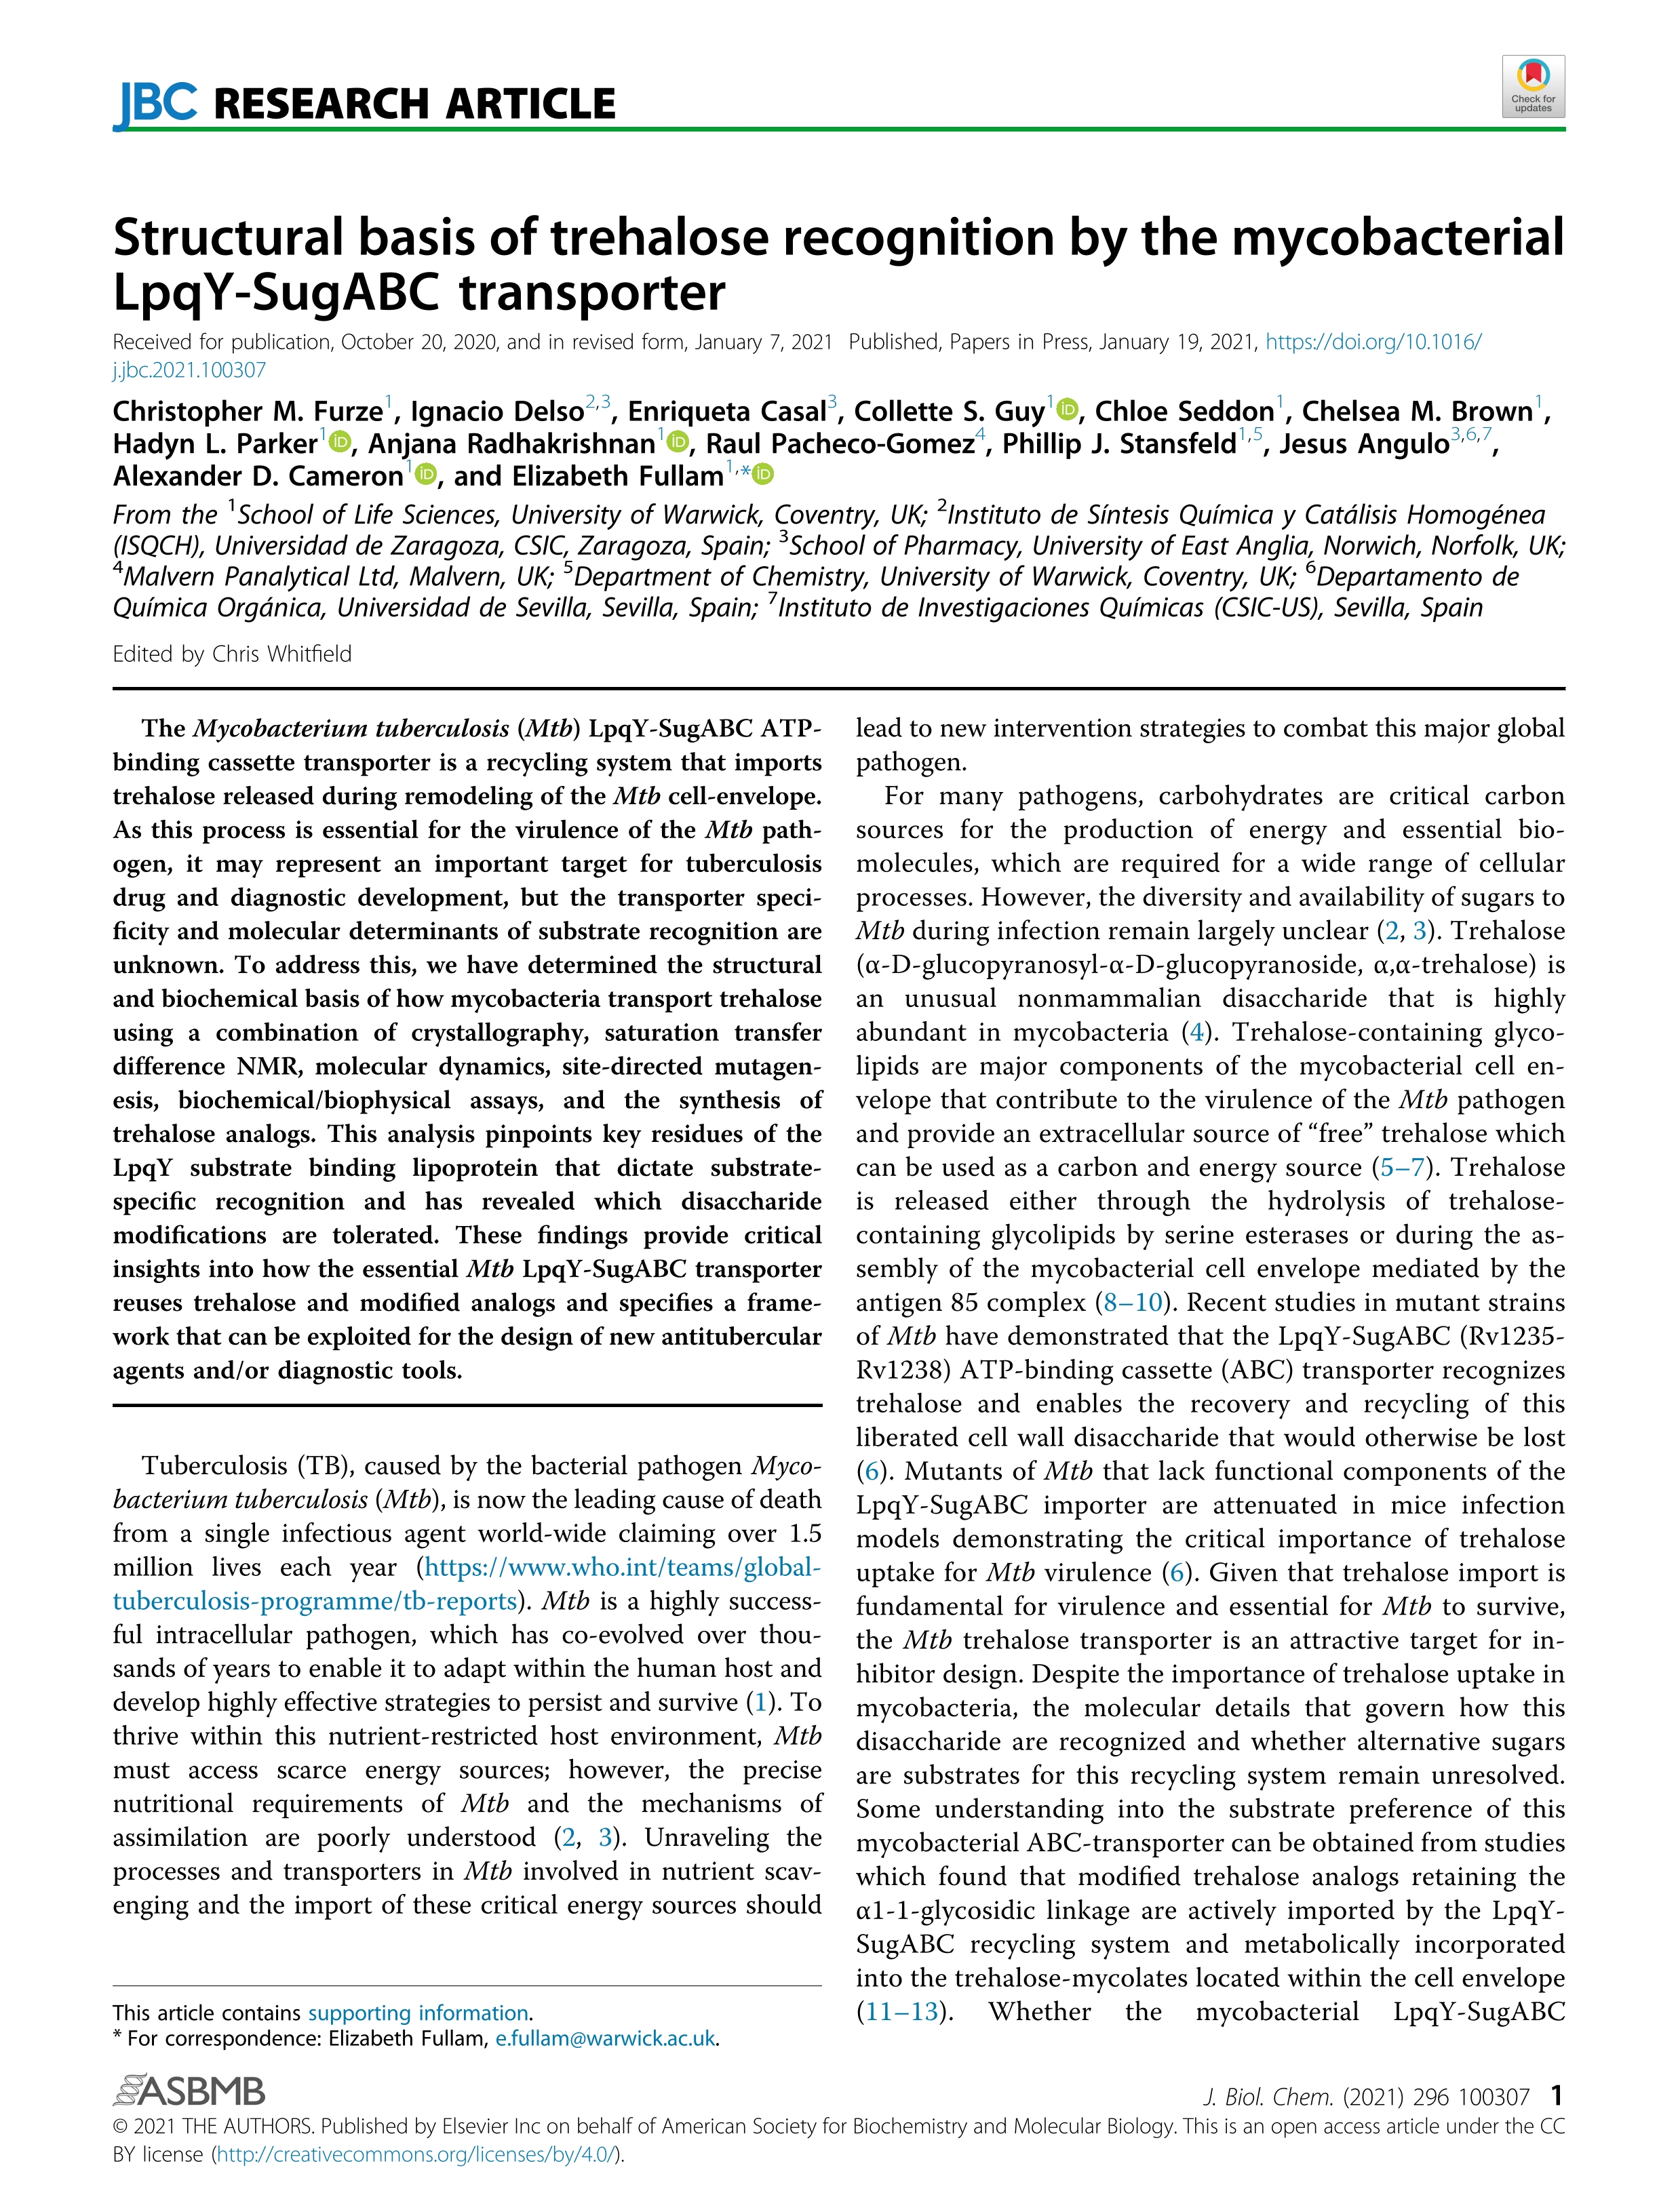 Structural basis of trehalose recognition by the mycobacterial LpqY-SugABC transporter